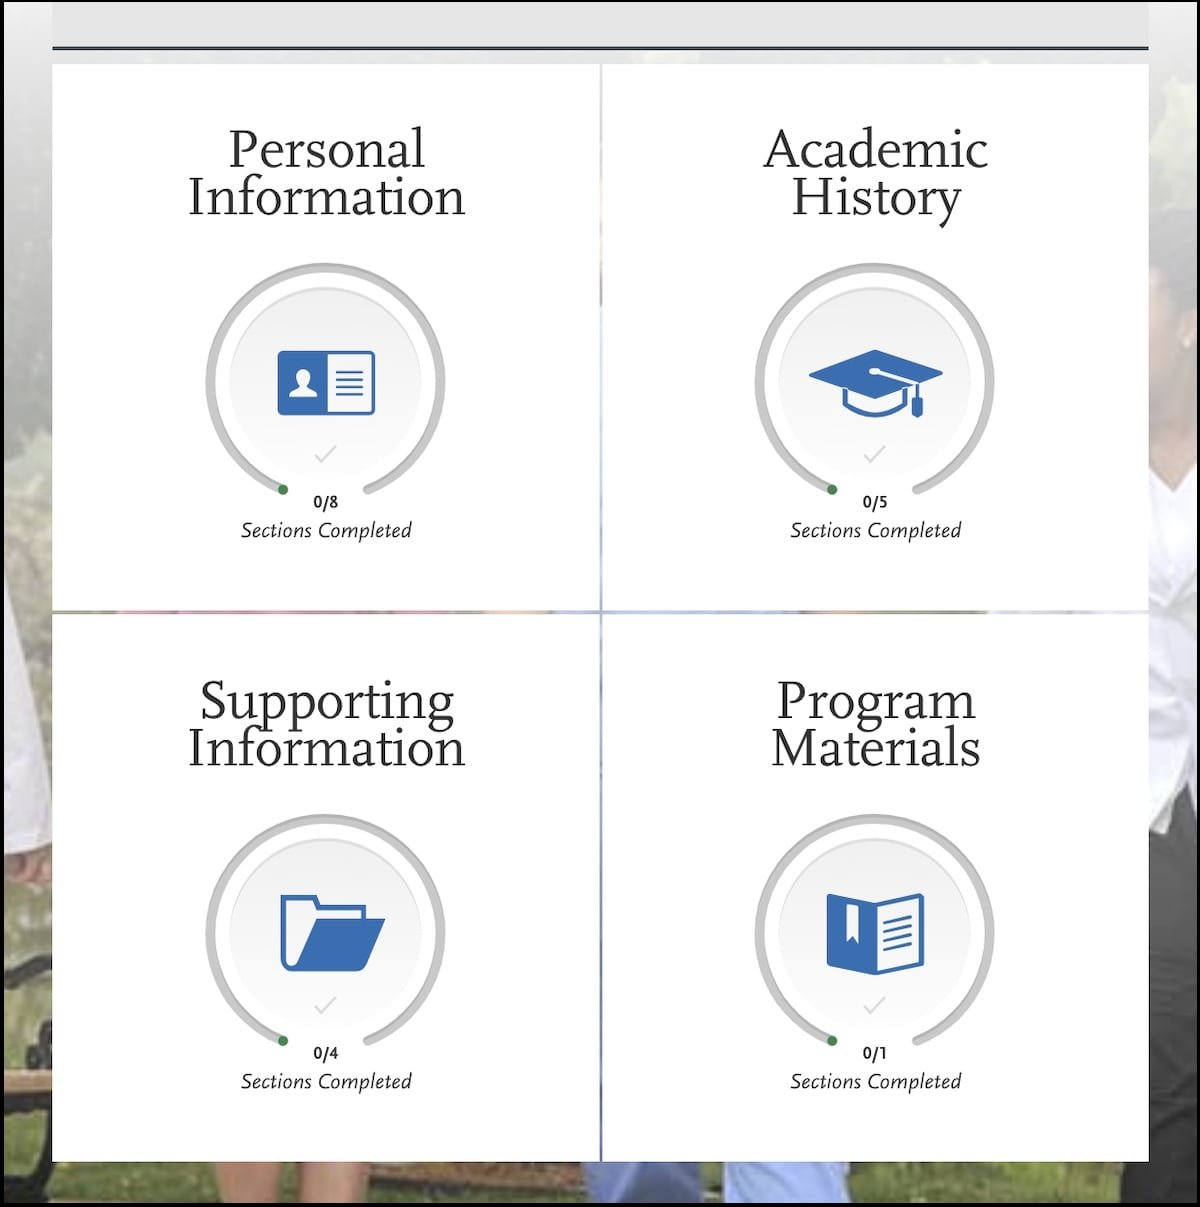 Four sections of the AACOMAS application screenshot